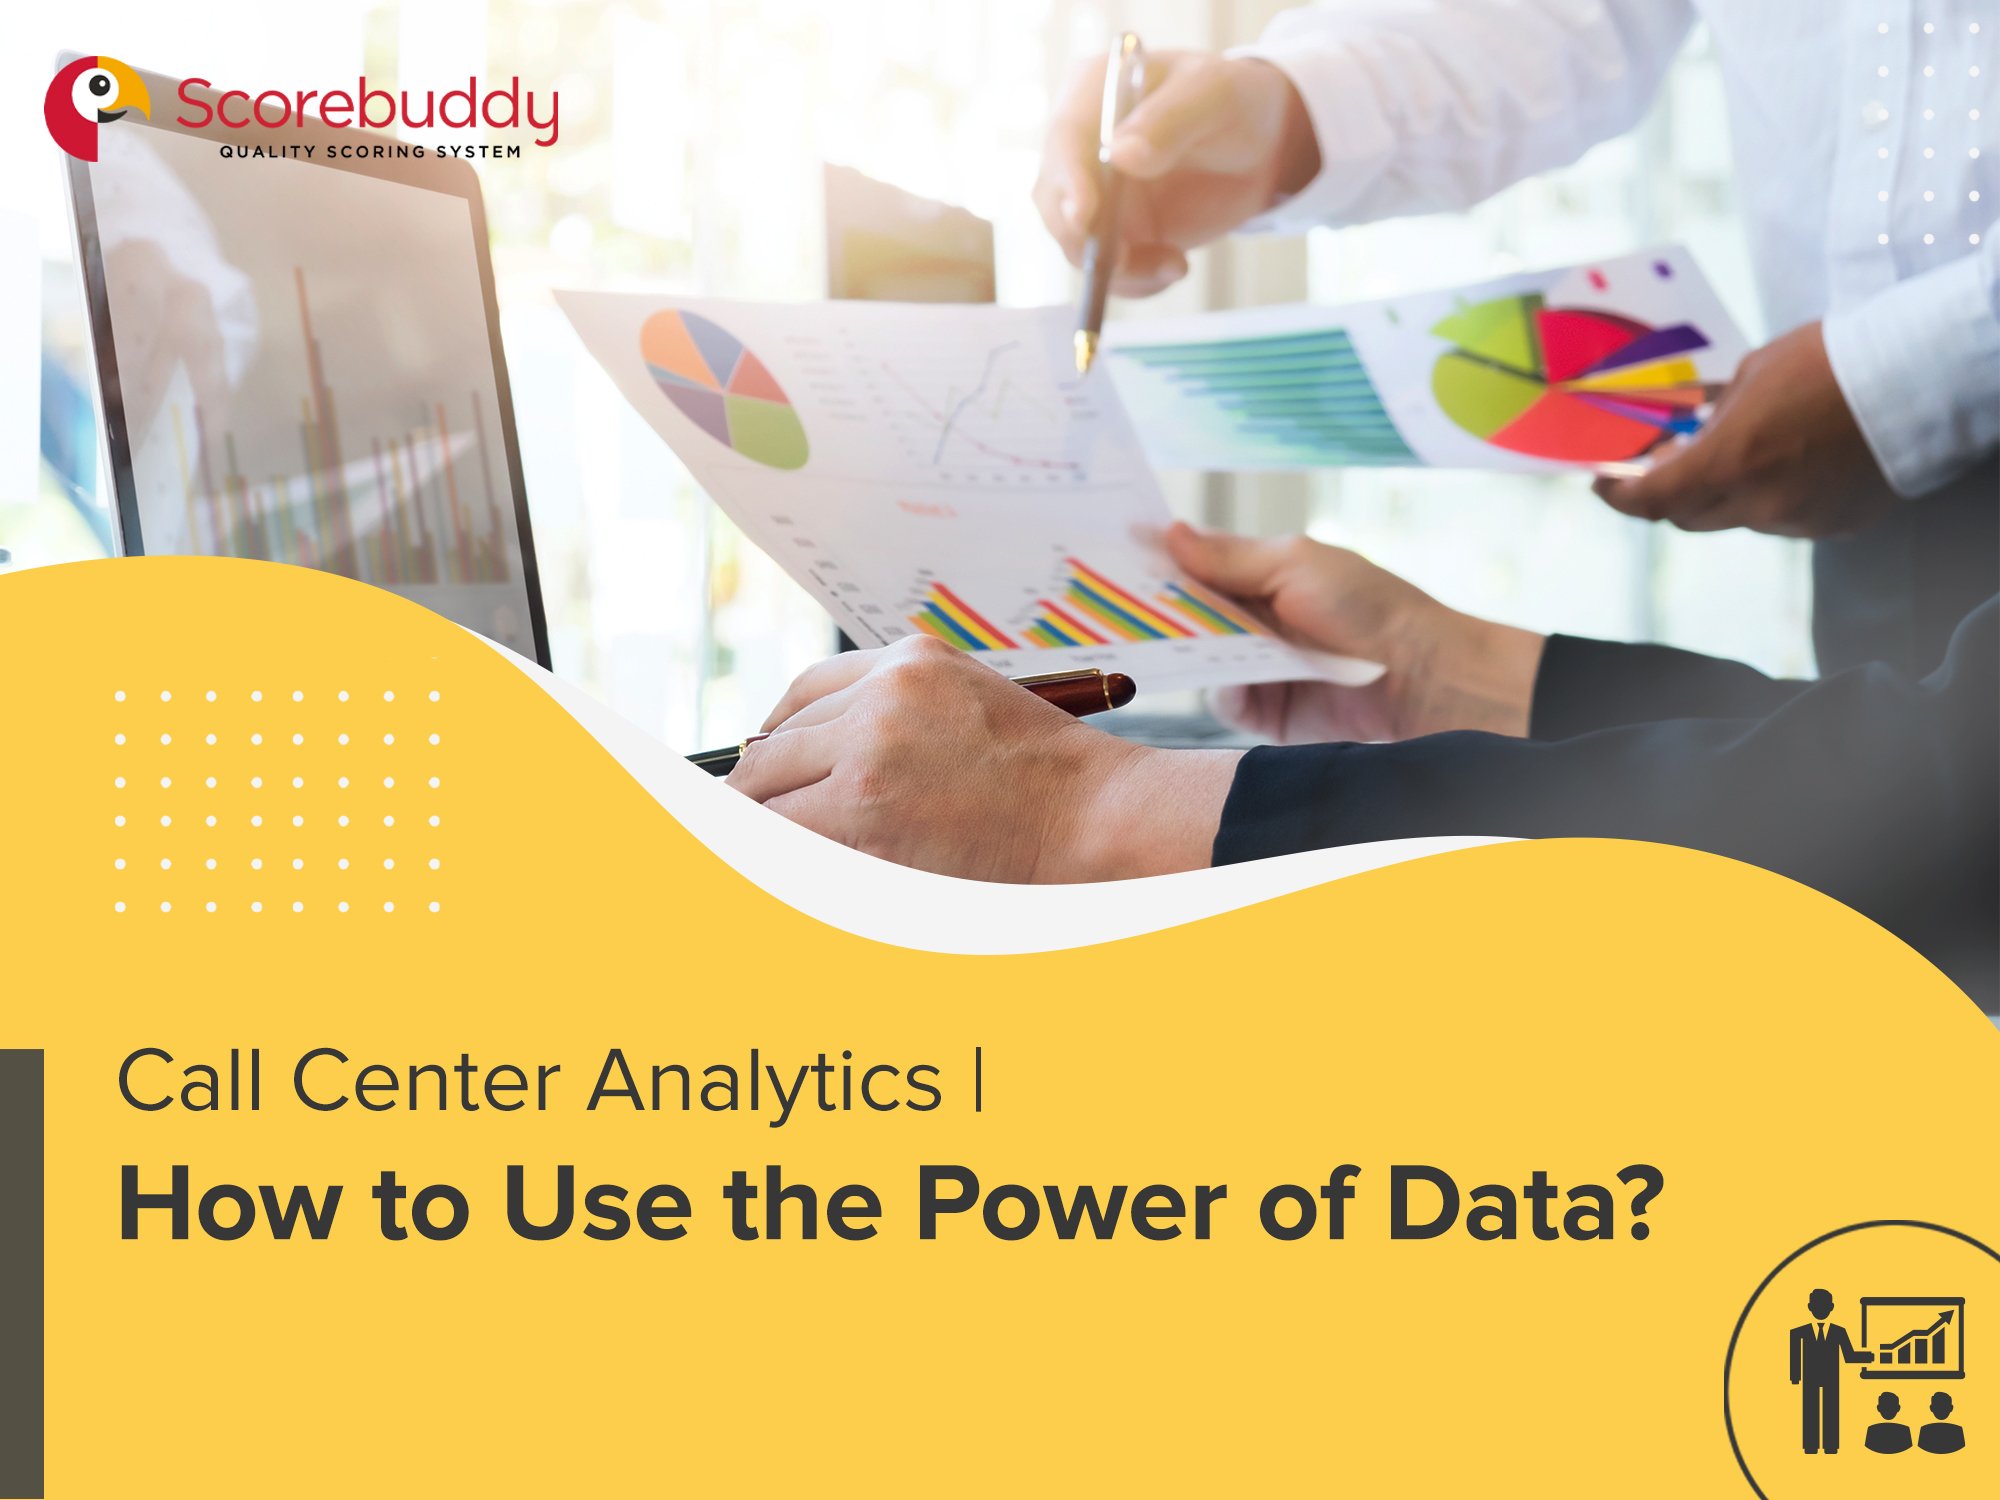 Call Center Analytics | How to Use the Power of Data?